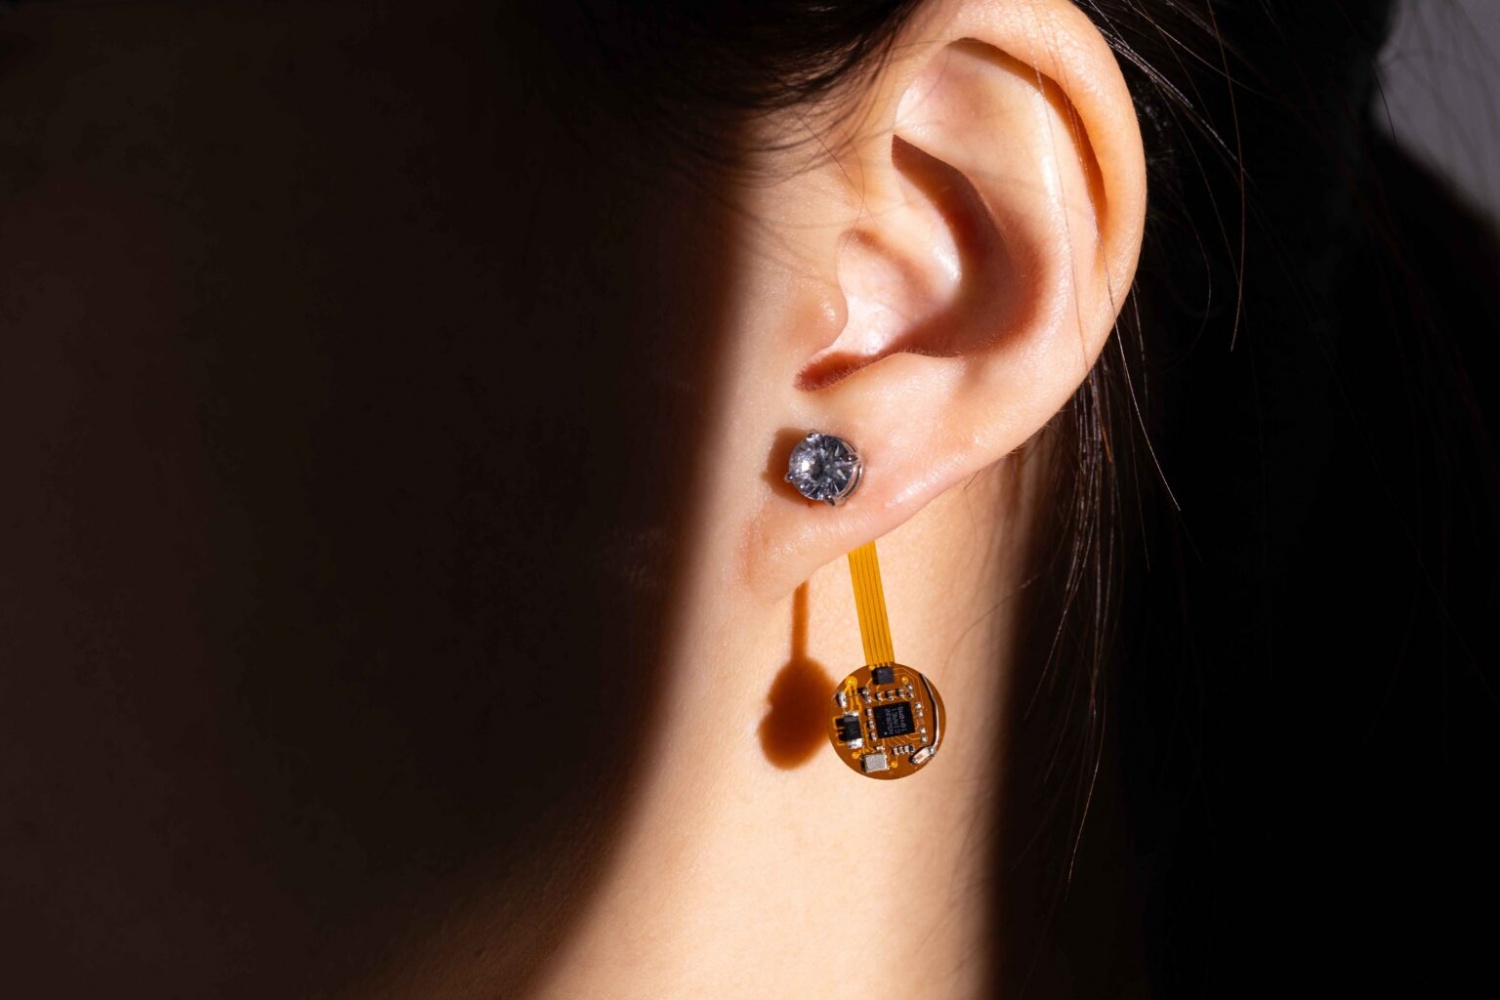 Fashion Meets Technology: New Smart Earrings Can Continuously Monitor a Person’s Temperature